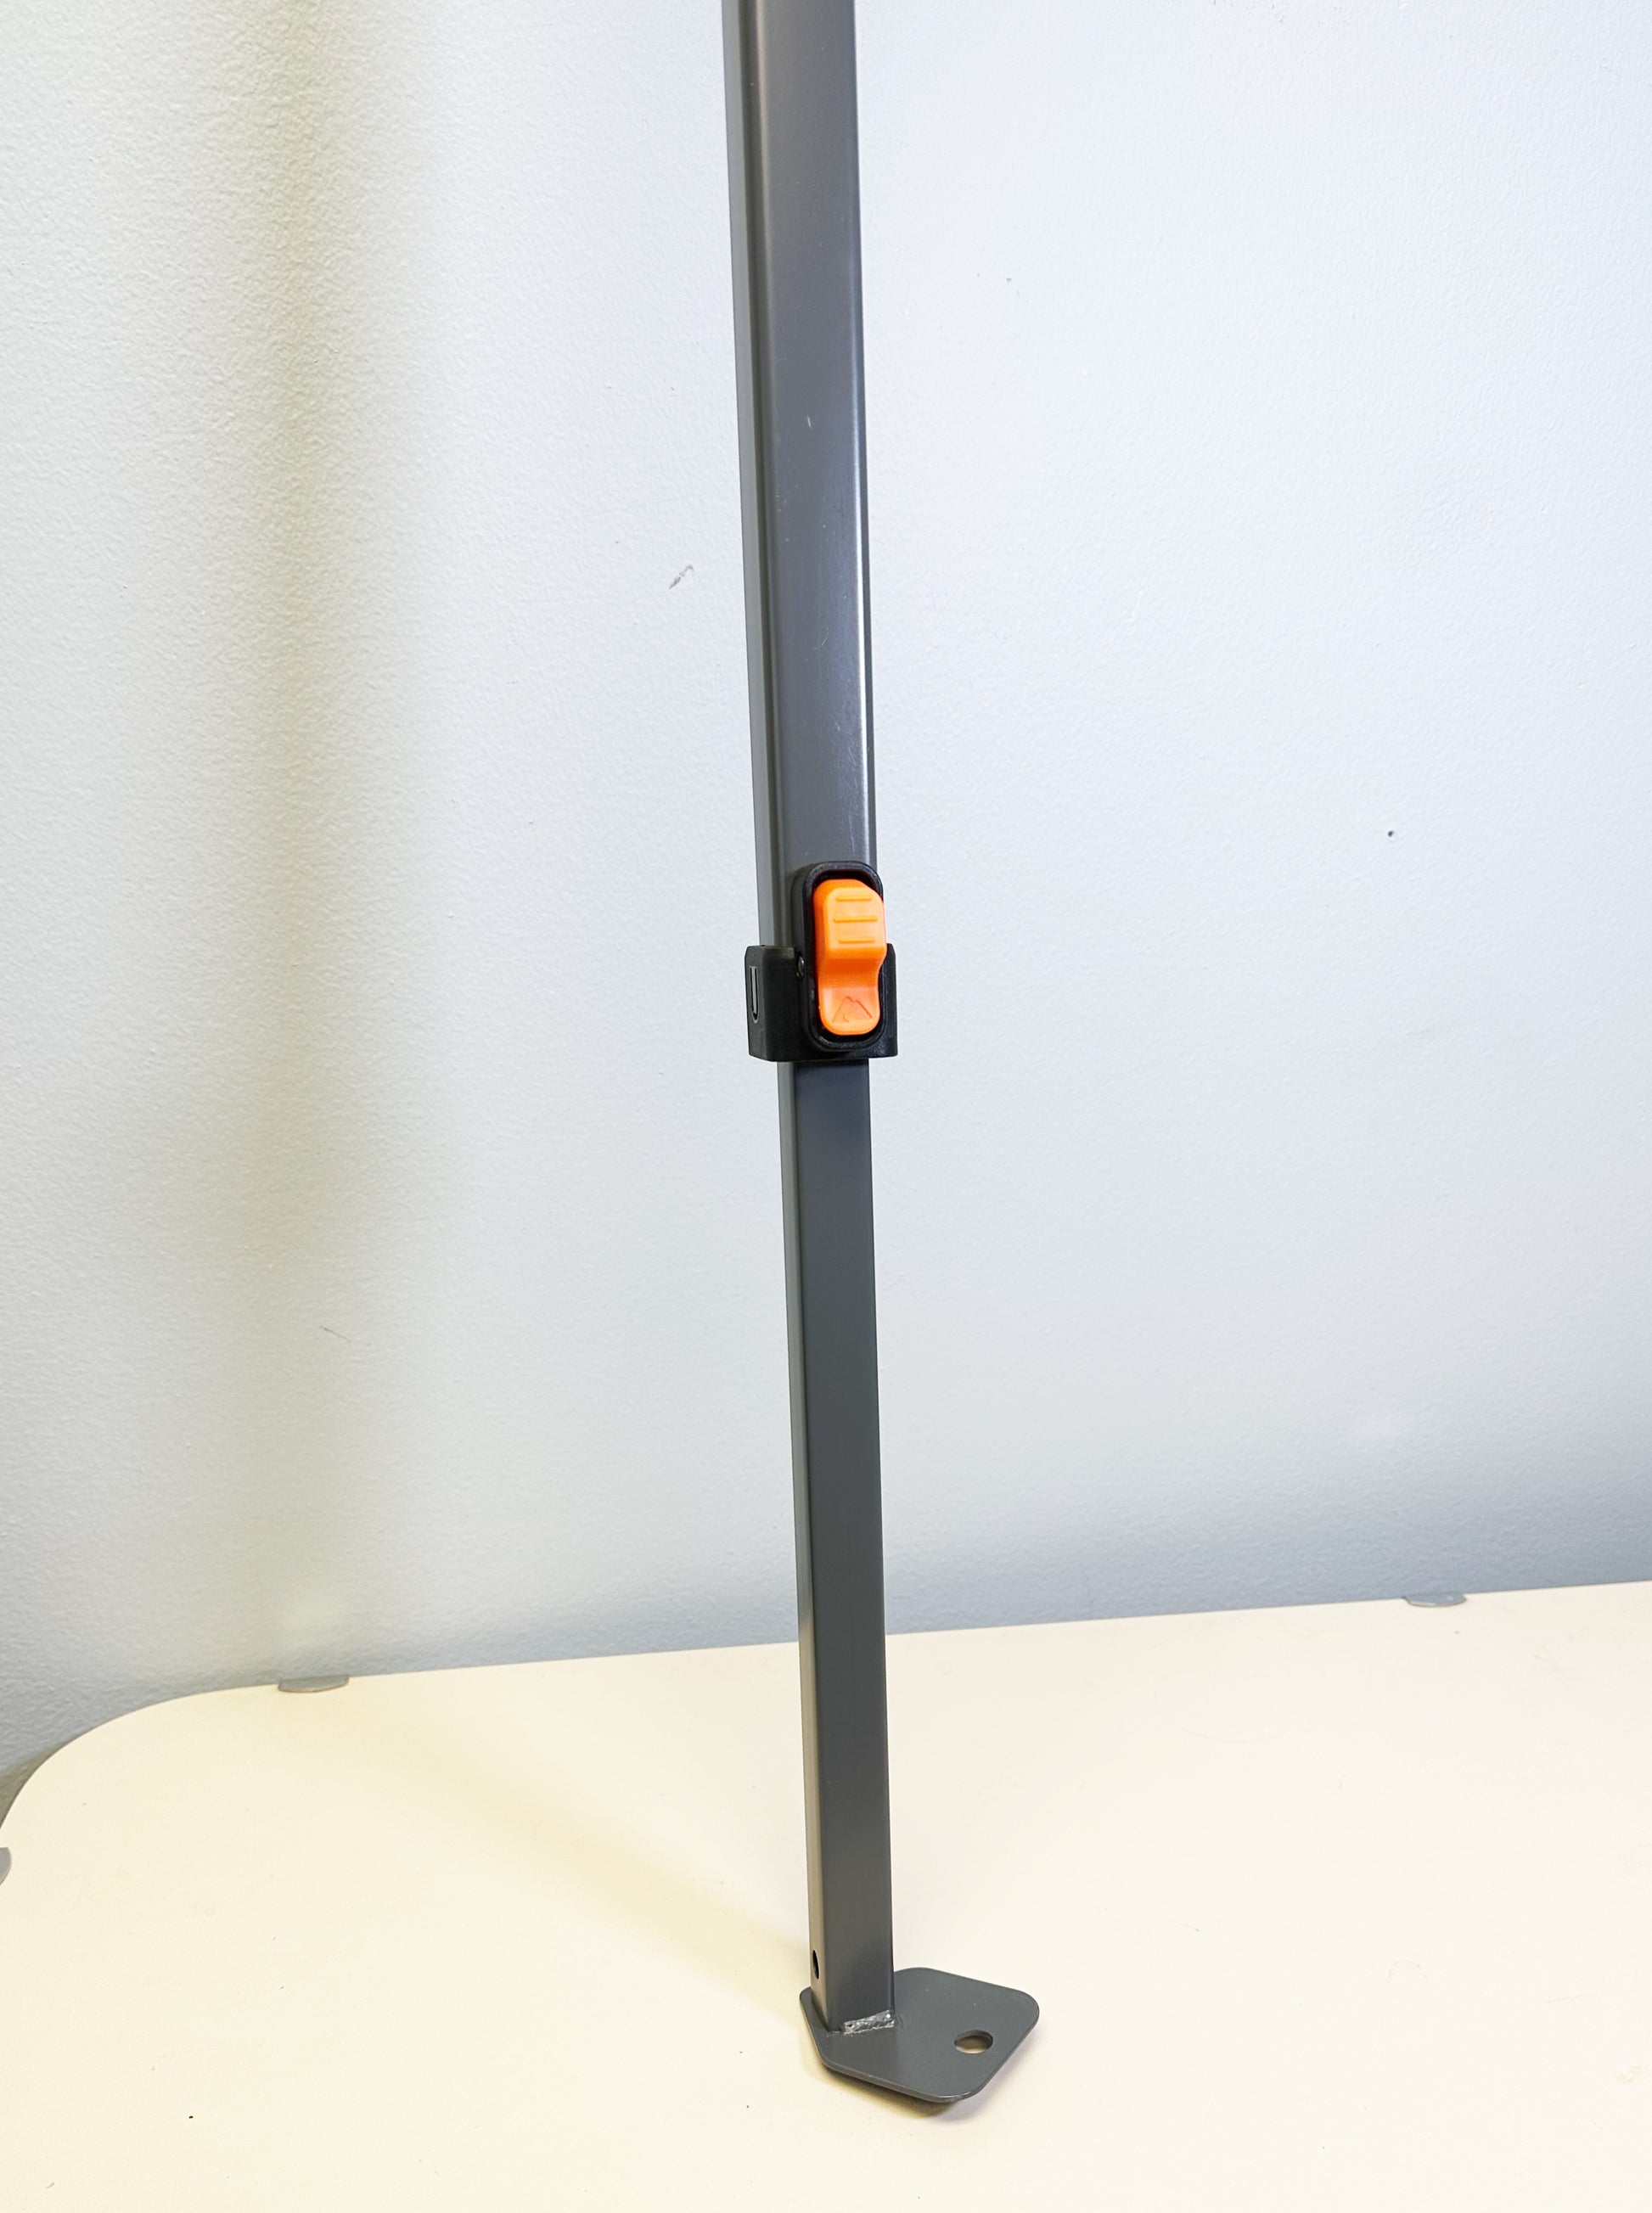  This image shows the lower section of an Ozark Trail canopy adjustable leg, highlighting the locking mechanism which is typically used to secure the leg at the desired height, and the foot of the leg that would rest on the ground to provide support for the canopy.